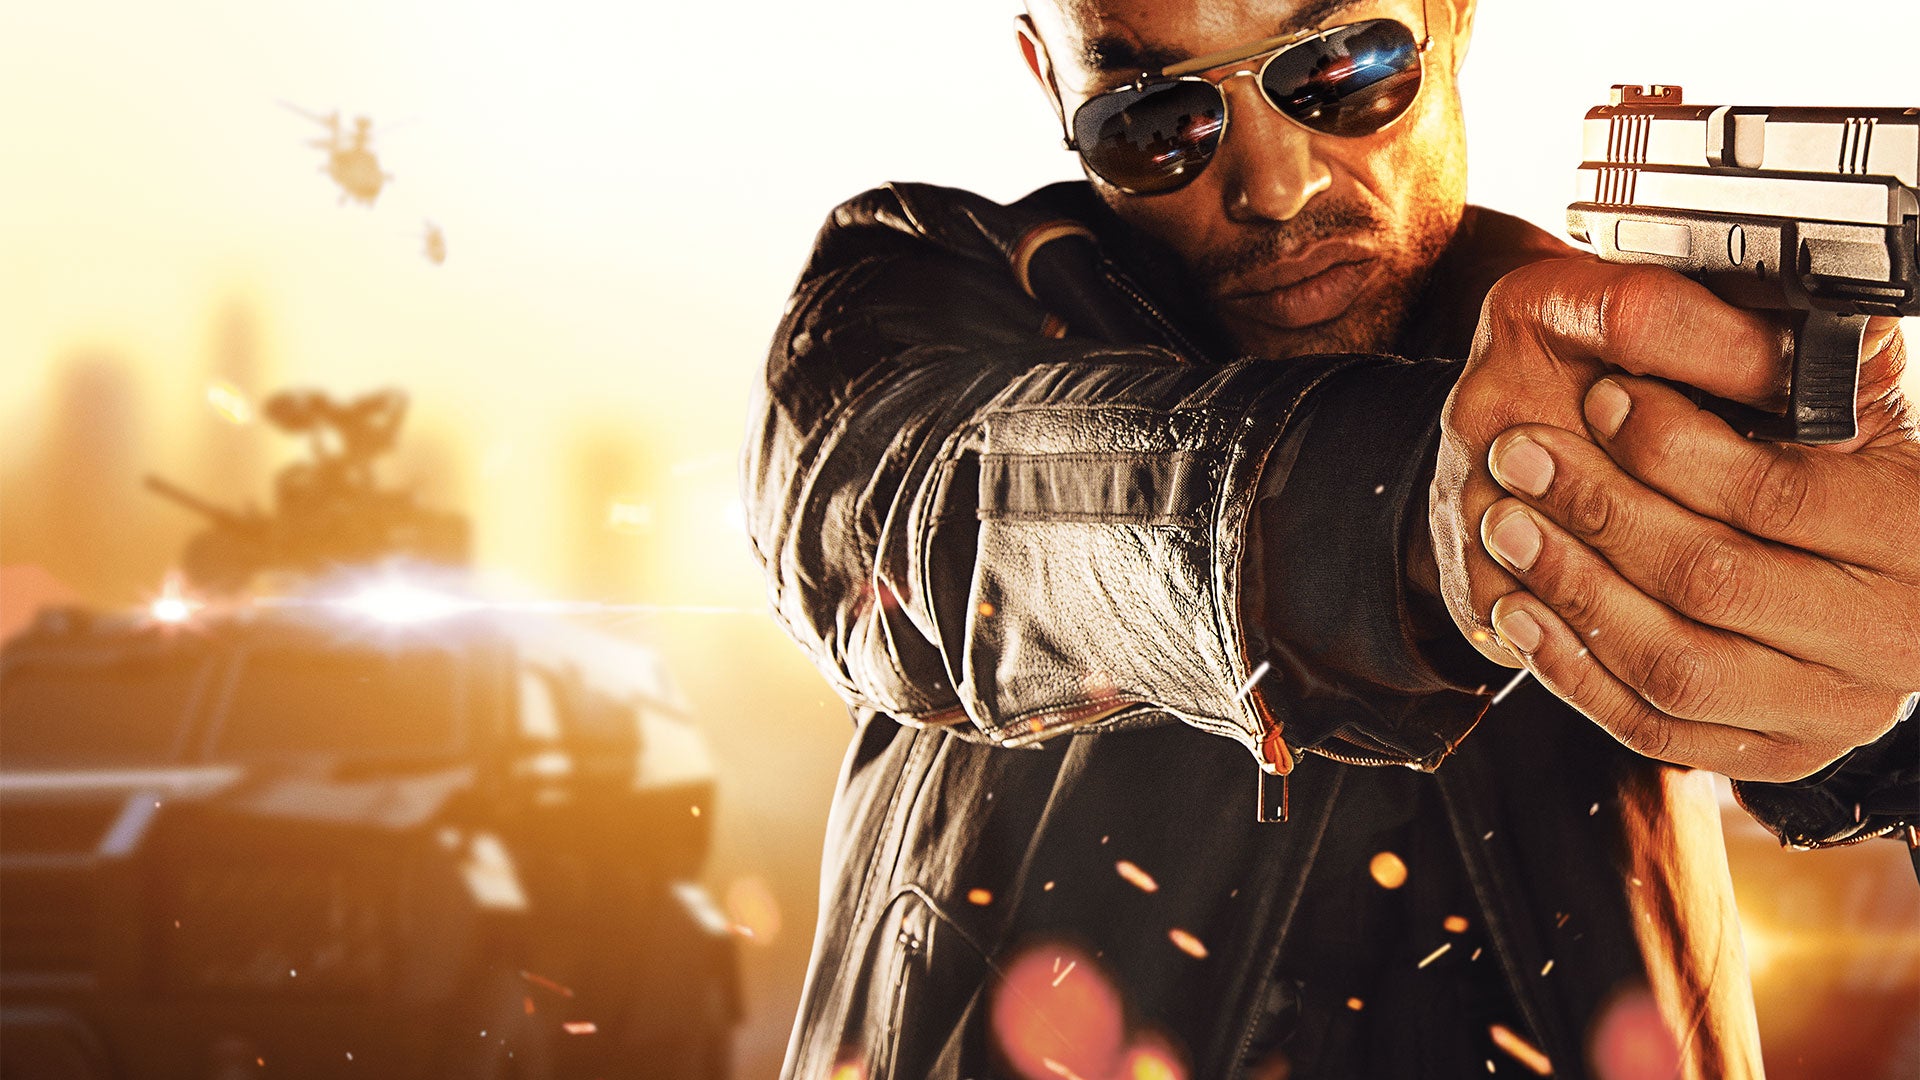 Image for Battlefield: Hardline developer hit with "small" number of lay-offs